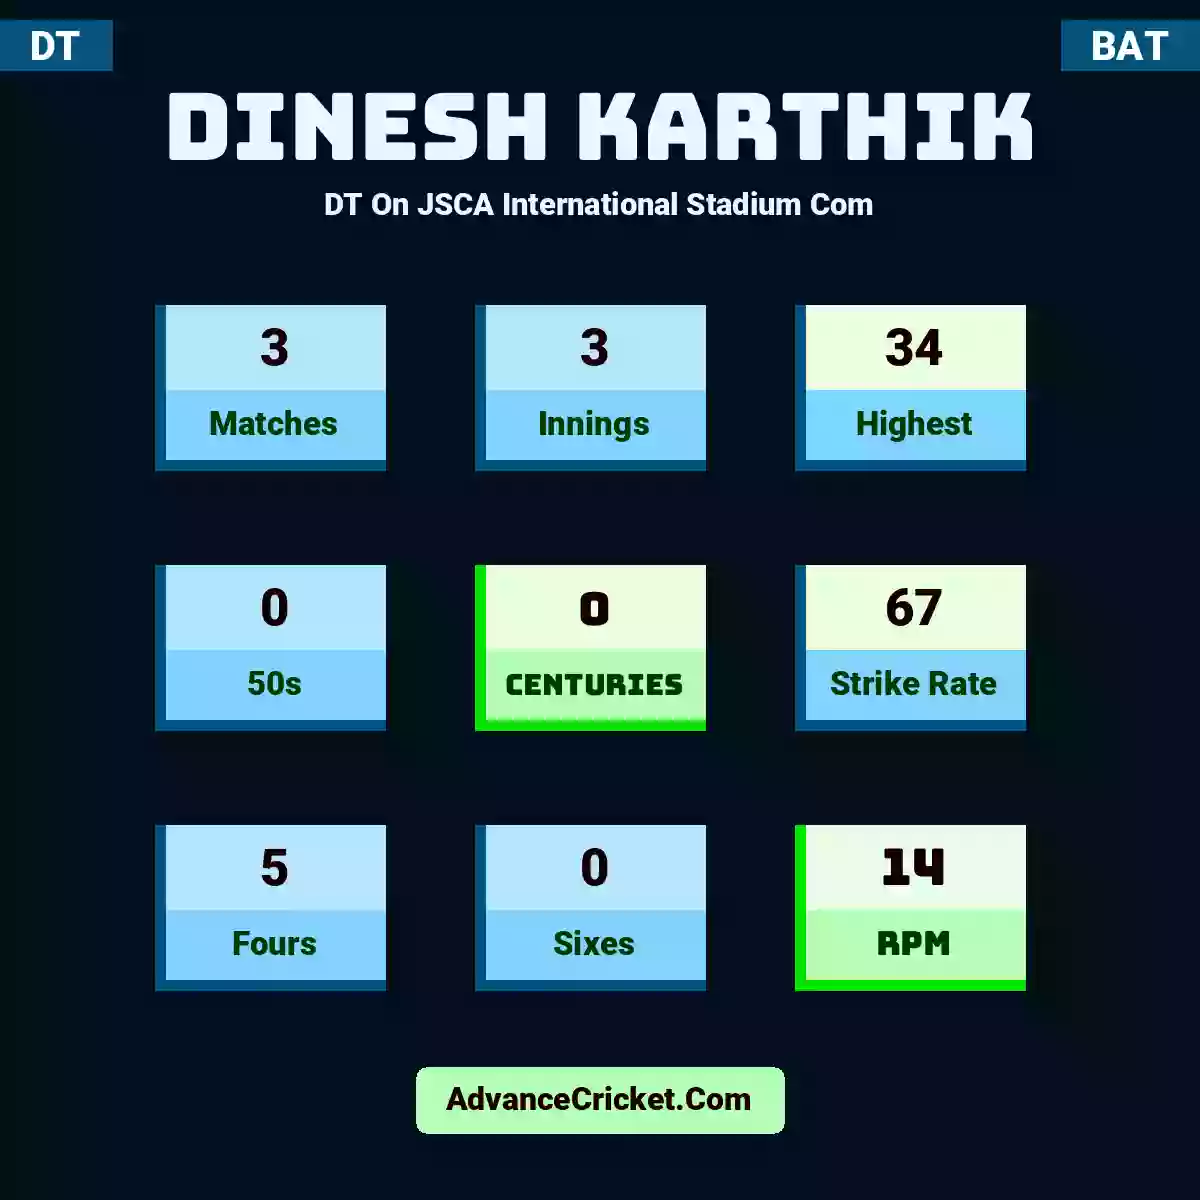 Dinesh Karthik DT  On JSCA International Stadium Com, Dinesh Karthik played 3 matches, scored 34 runs as highest, 0 half-centuries, and 0 centuries, with a strike rate of 67. D.Karthik hit 5 fours and 0 sixes, with an RPM of 14.